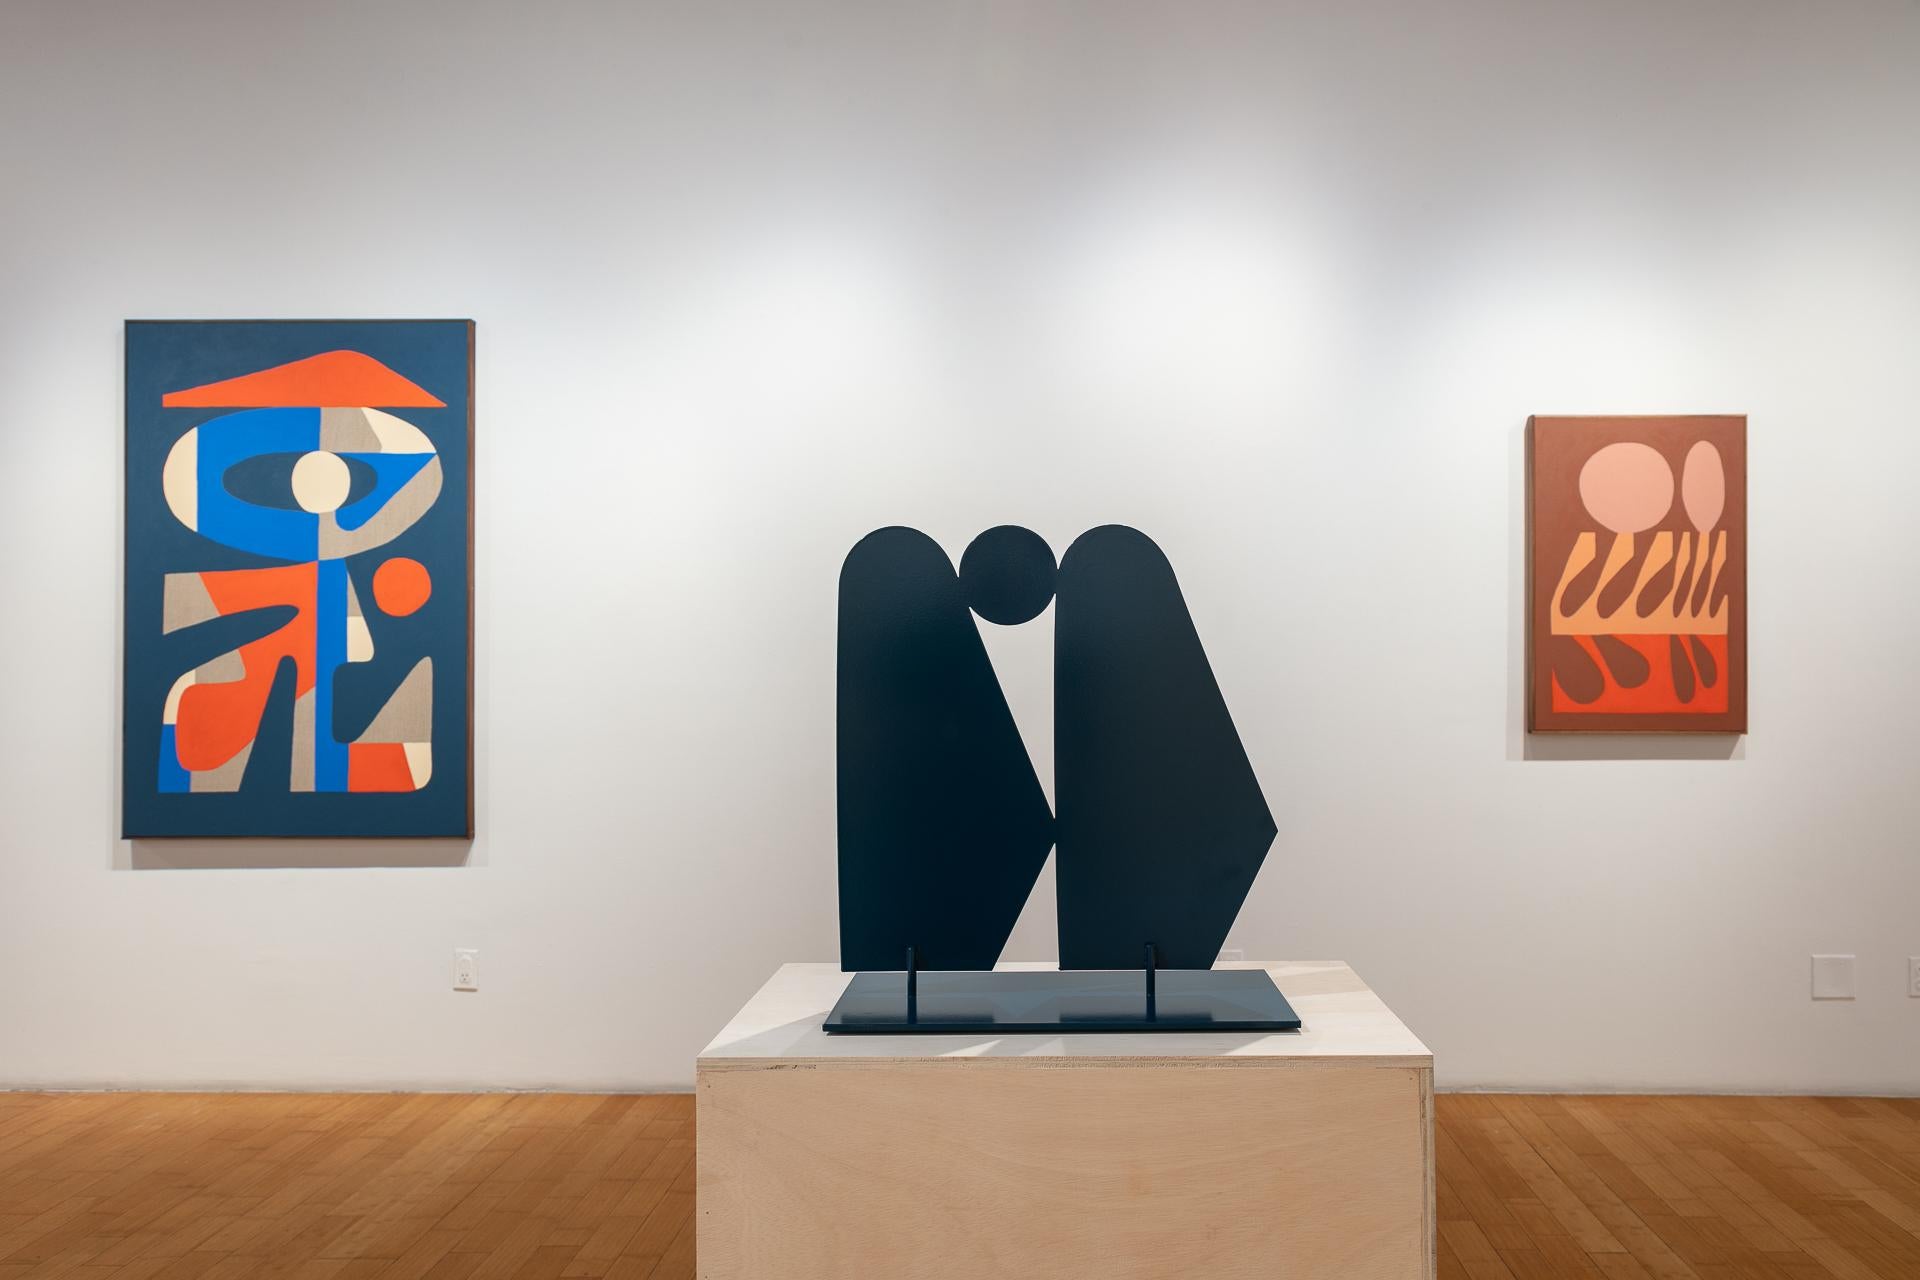 In his distinctive abstract style, Hudson's steel sculptures are based on abstract, repetitious forms that extend and contract into harmonious compositions. 

Working from a cache of abstract shapes, Hudson adjusts scale and proportion, arranging